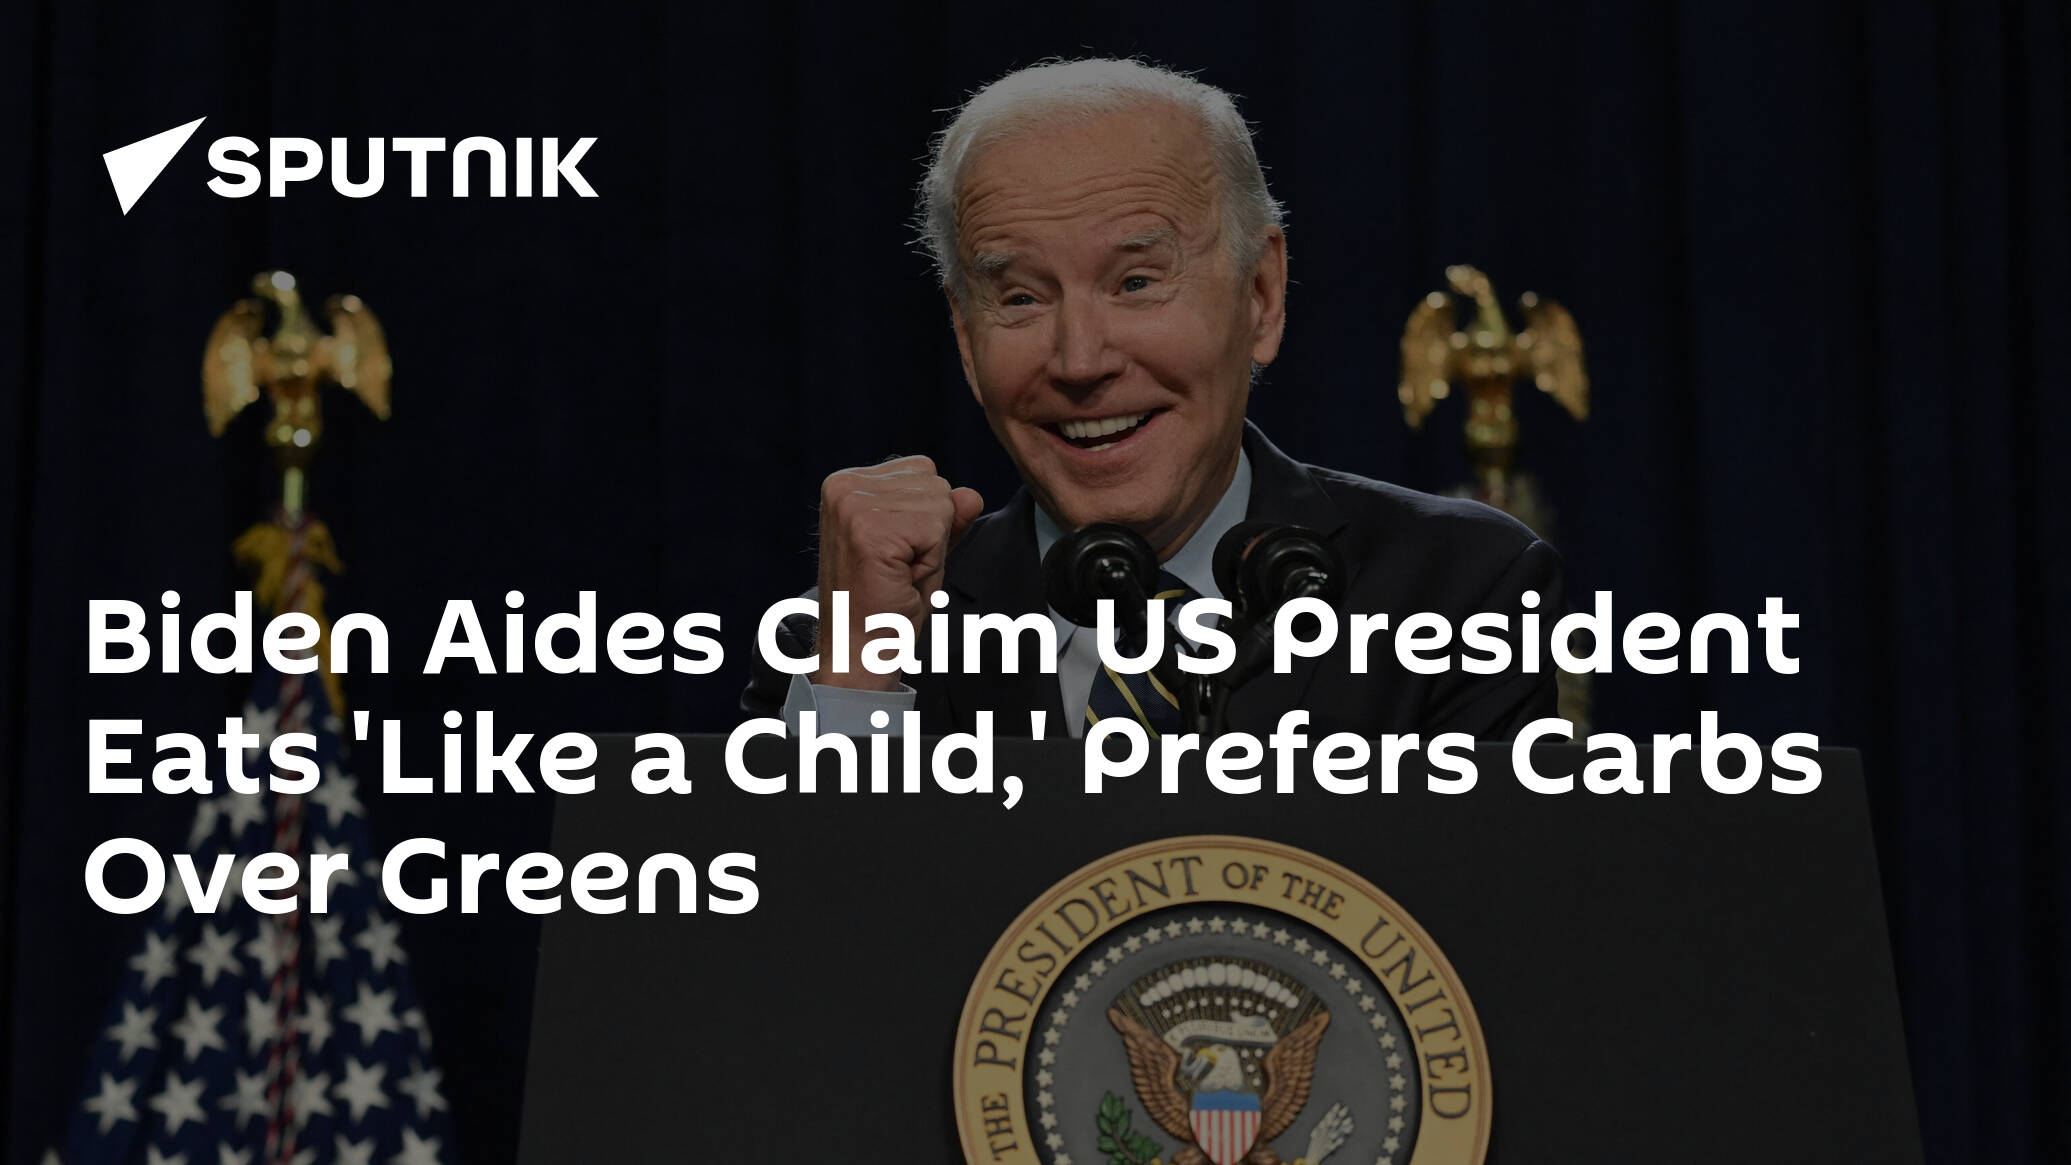 Biden Aides Claim US President Eats 'Like a Child,' Prefers Carbs Over Greens